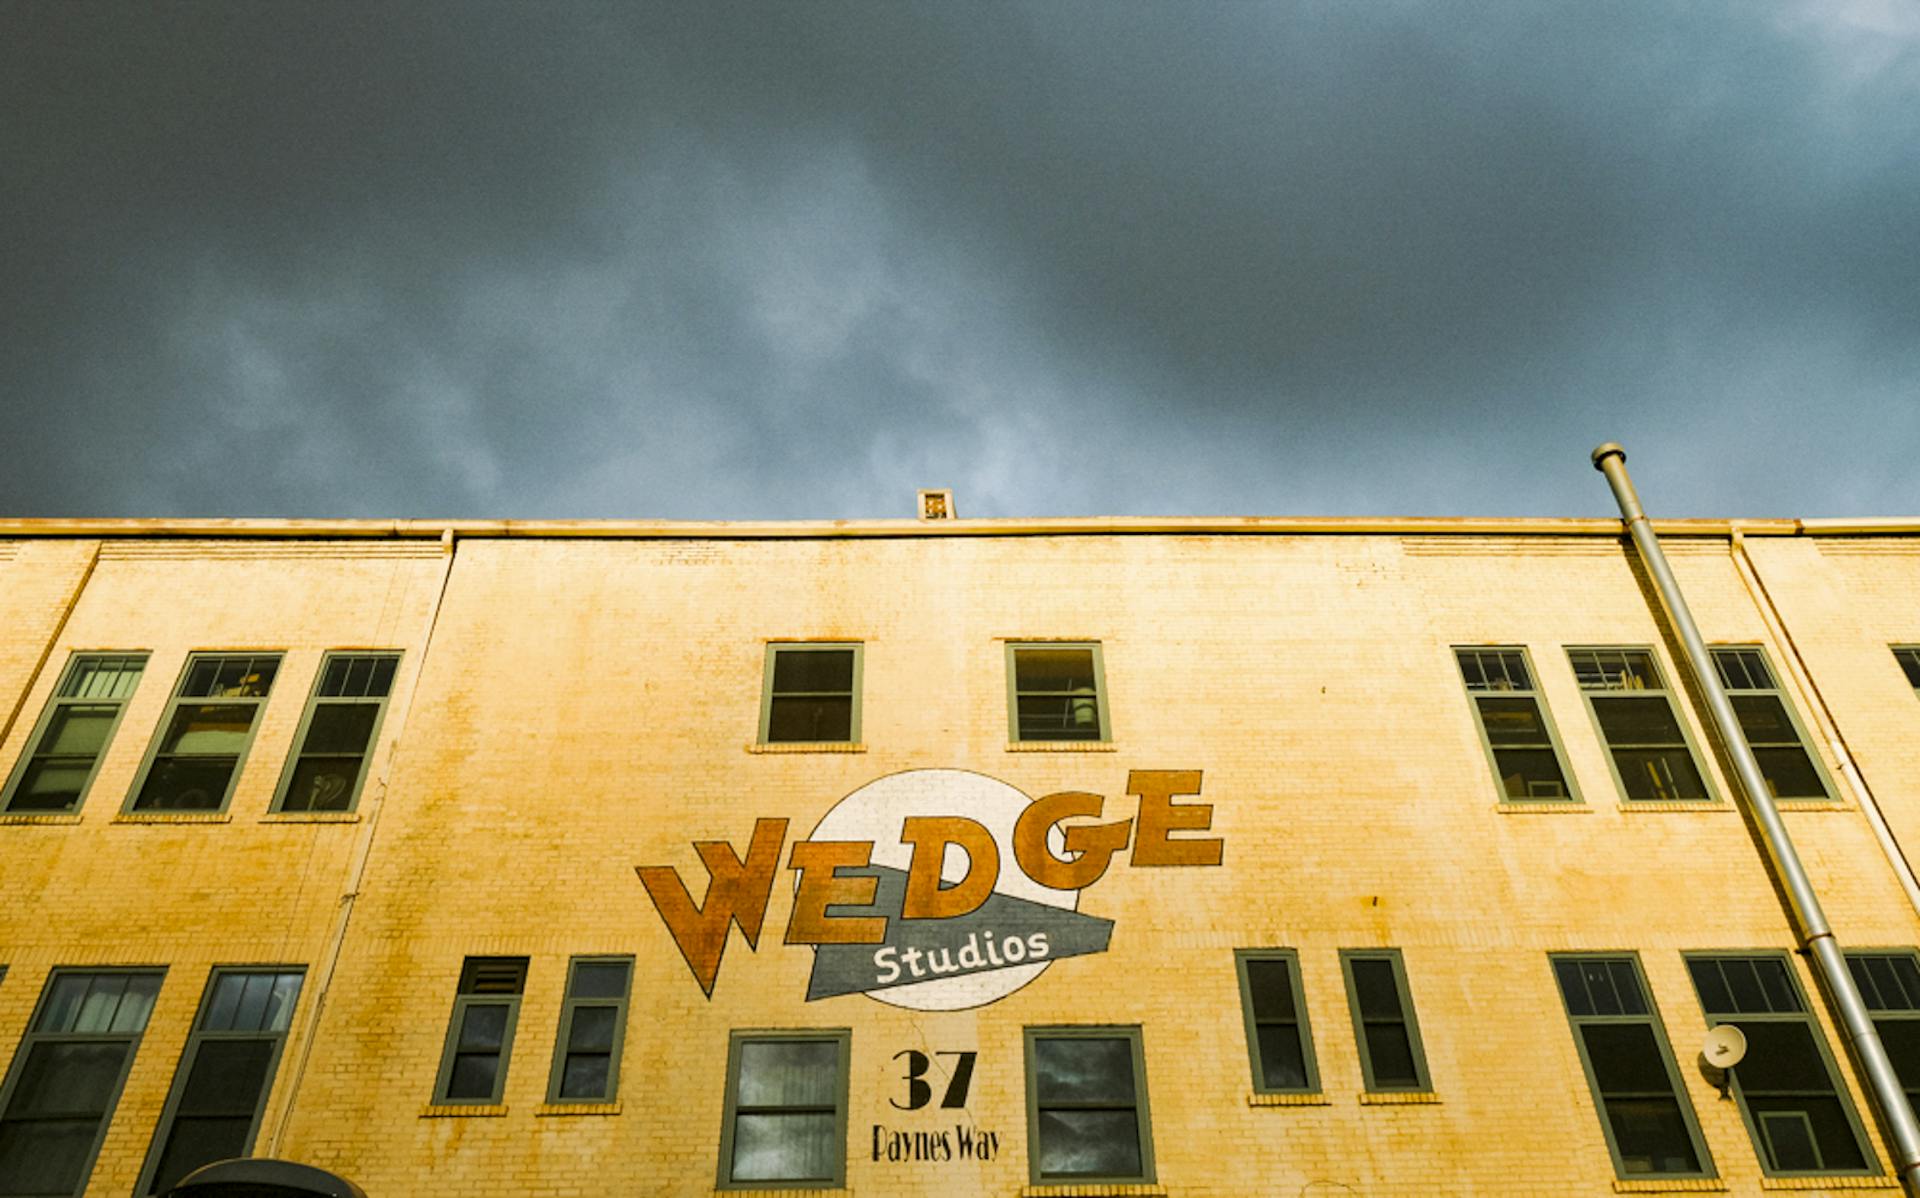 The front of the Wedge Studios taproom on a cloudy day